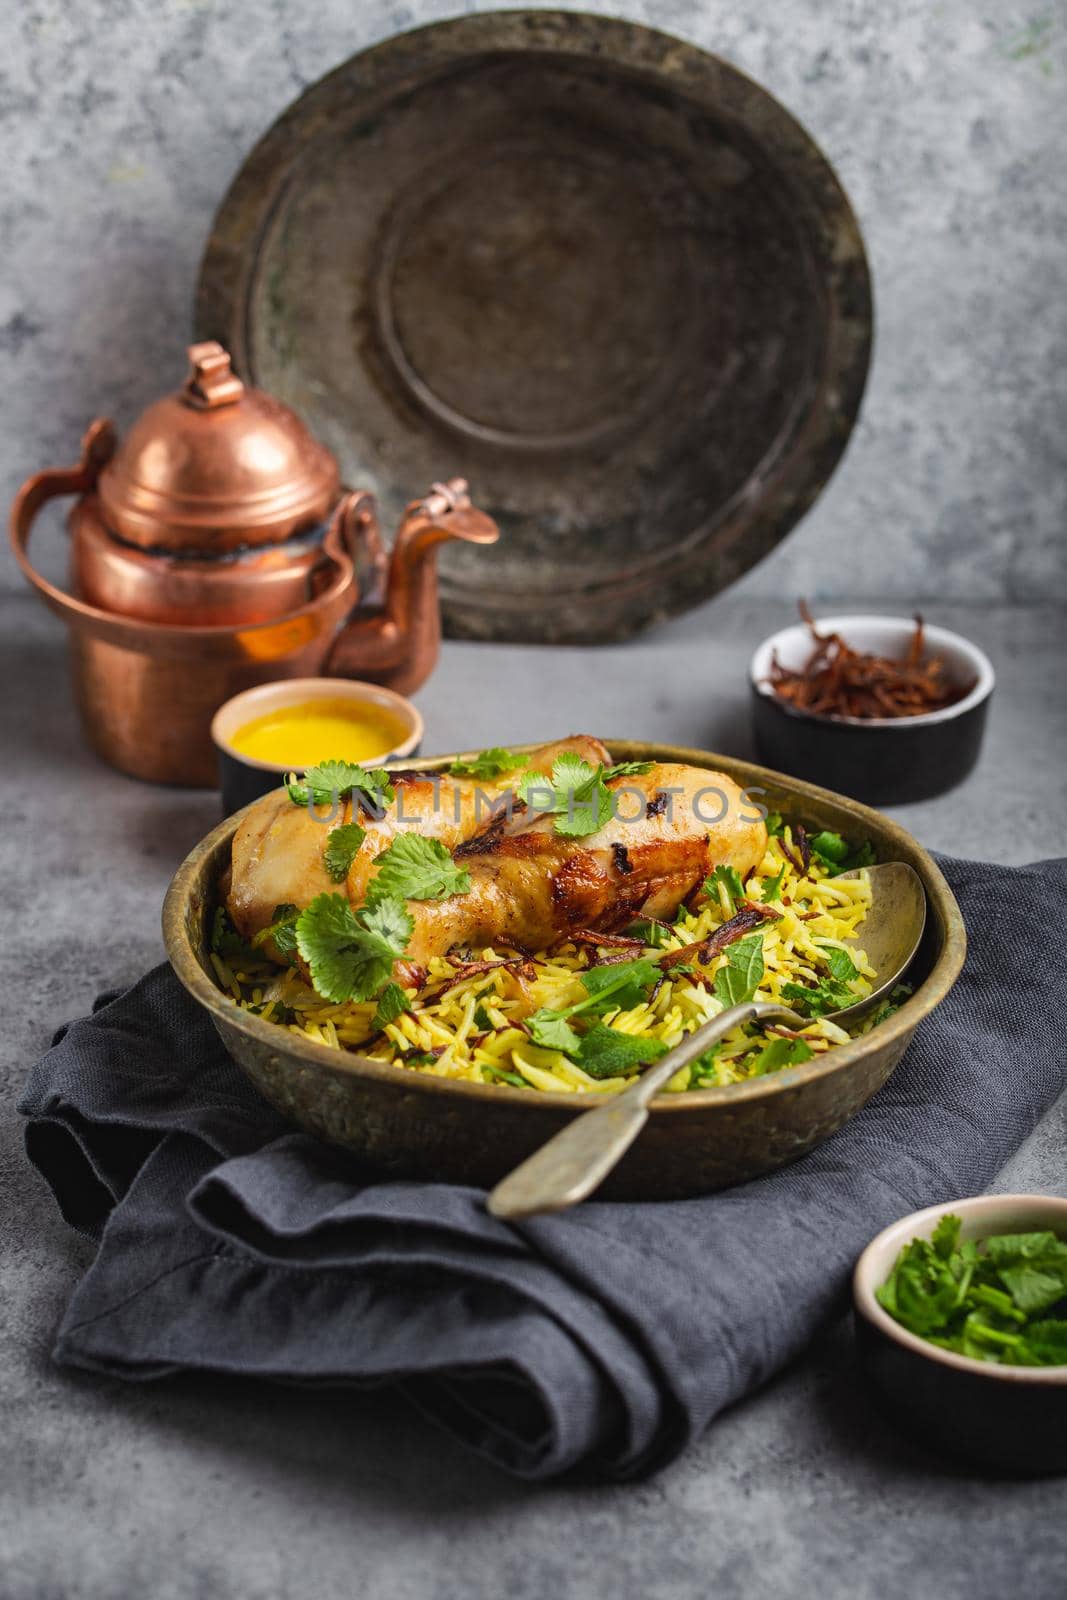 Biryani chicken, traditional dish of Indian cuisine, with basmati rice, fried onion, fresh cilantro in bowl on gray rustic stone background. Authentic Indian meal, close-up, selective focus